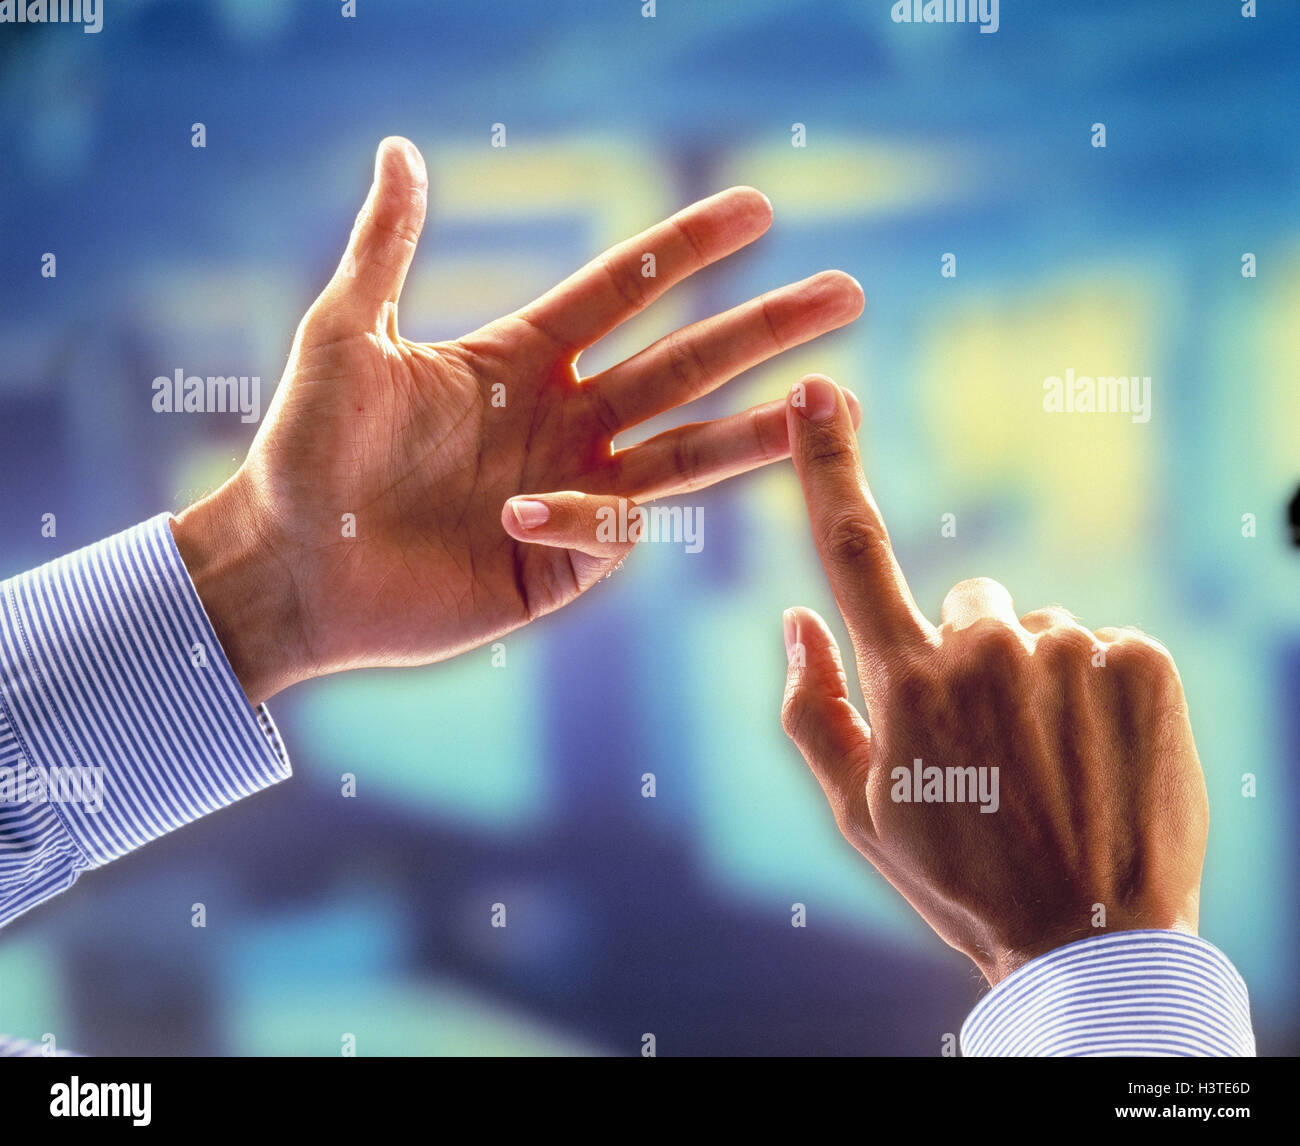 Man, detail, hands, fingers, enumerate man's hand, gesture, businessman, indicate, count, number, four, indicate, number, show, man's hands, cultivated Stock Photo